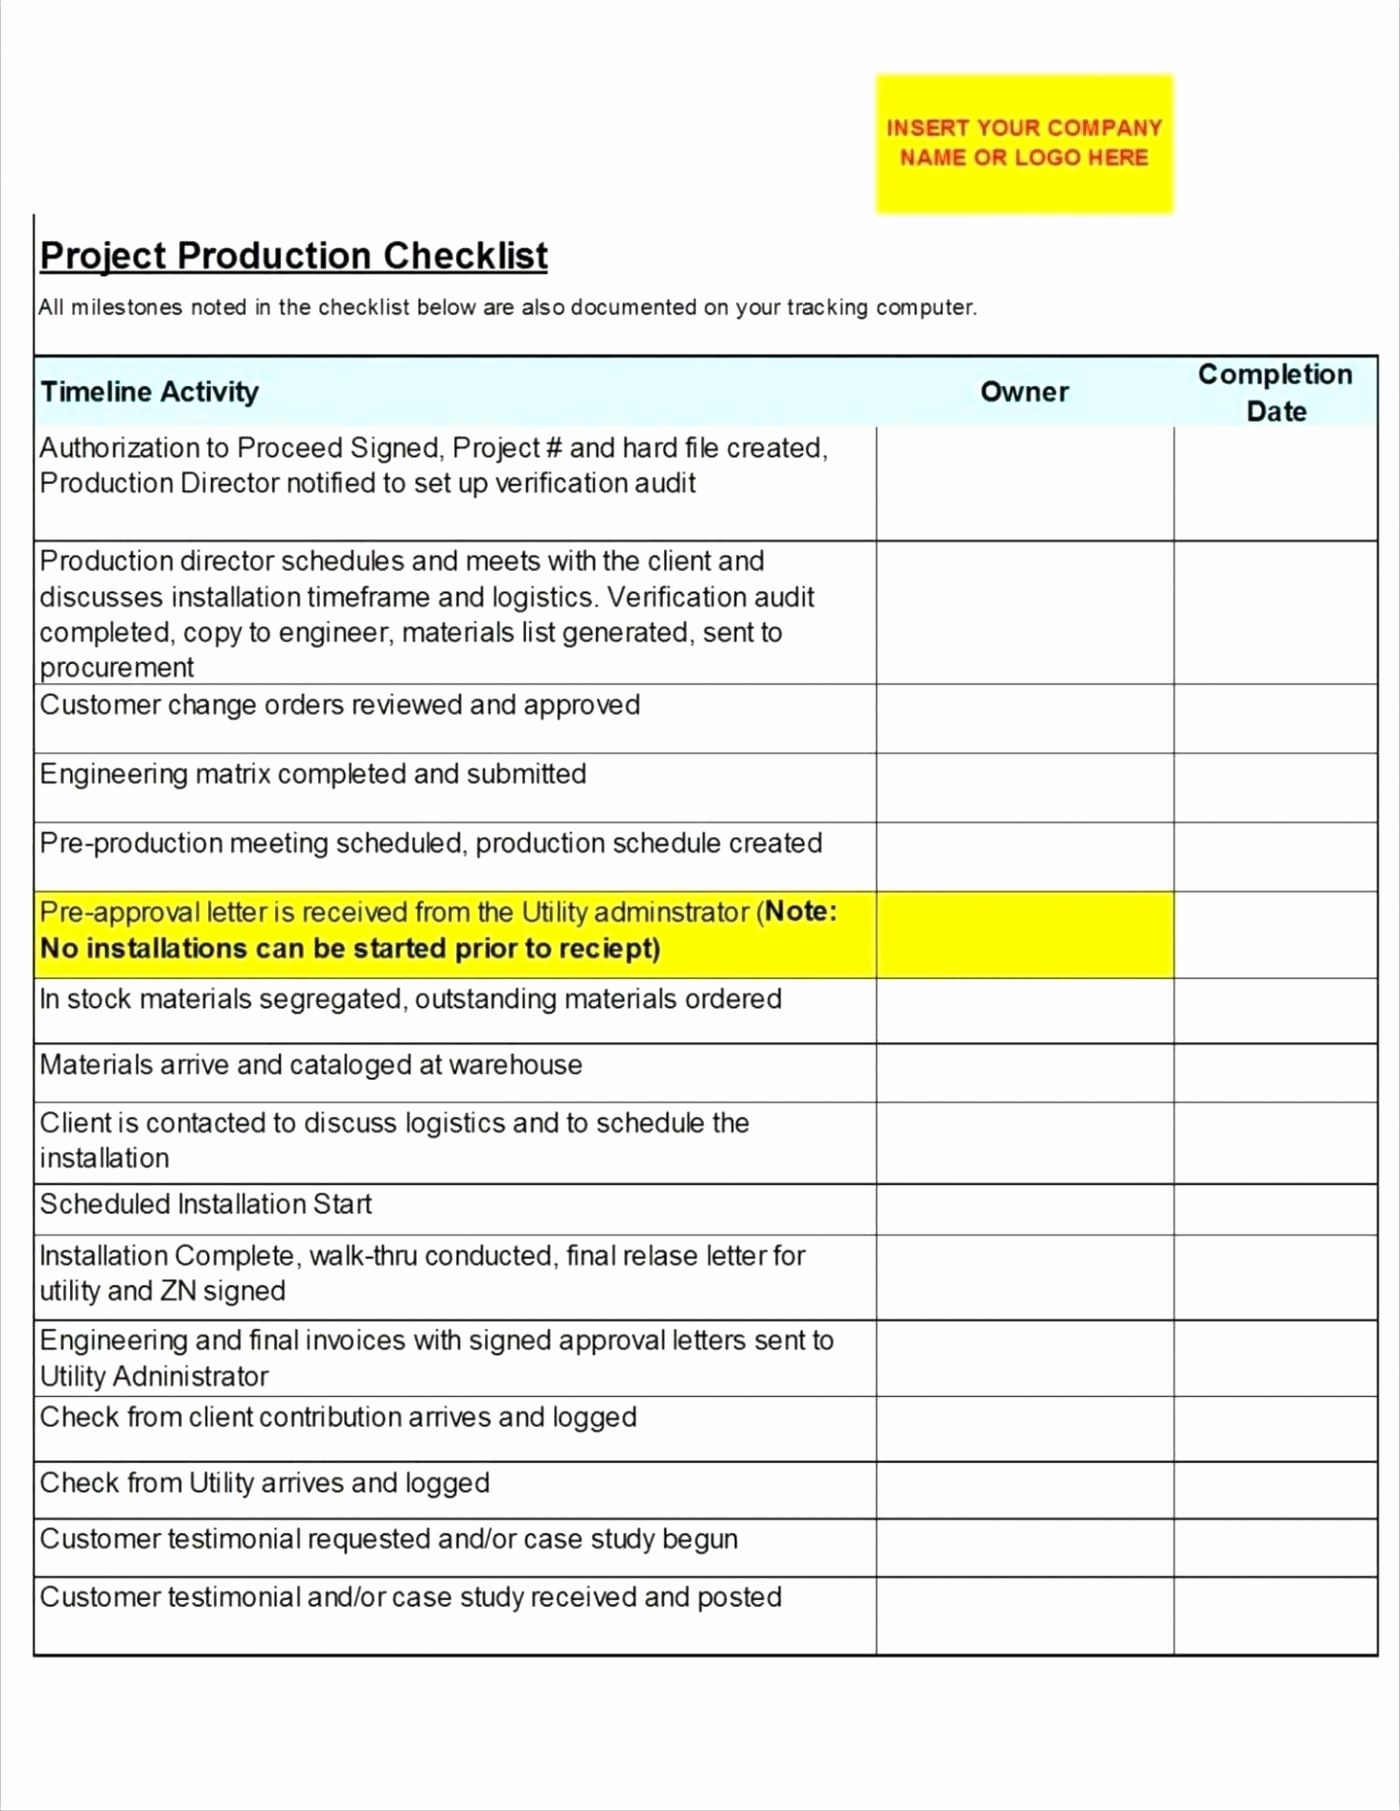 Production Downtime Spreadsheet Google Spreadshee production downtime